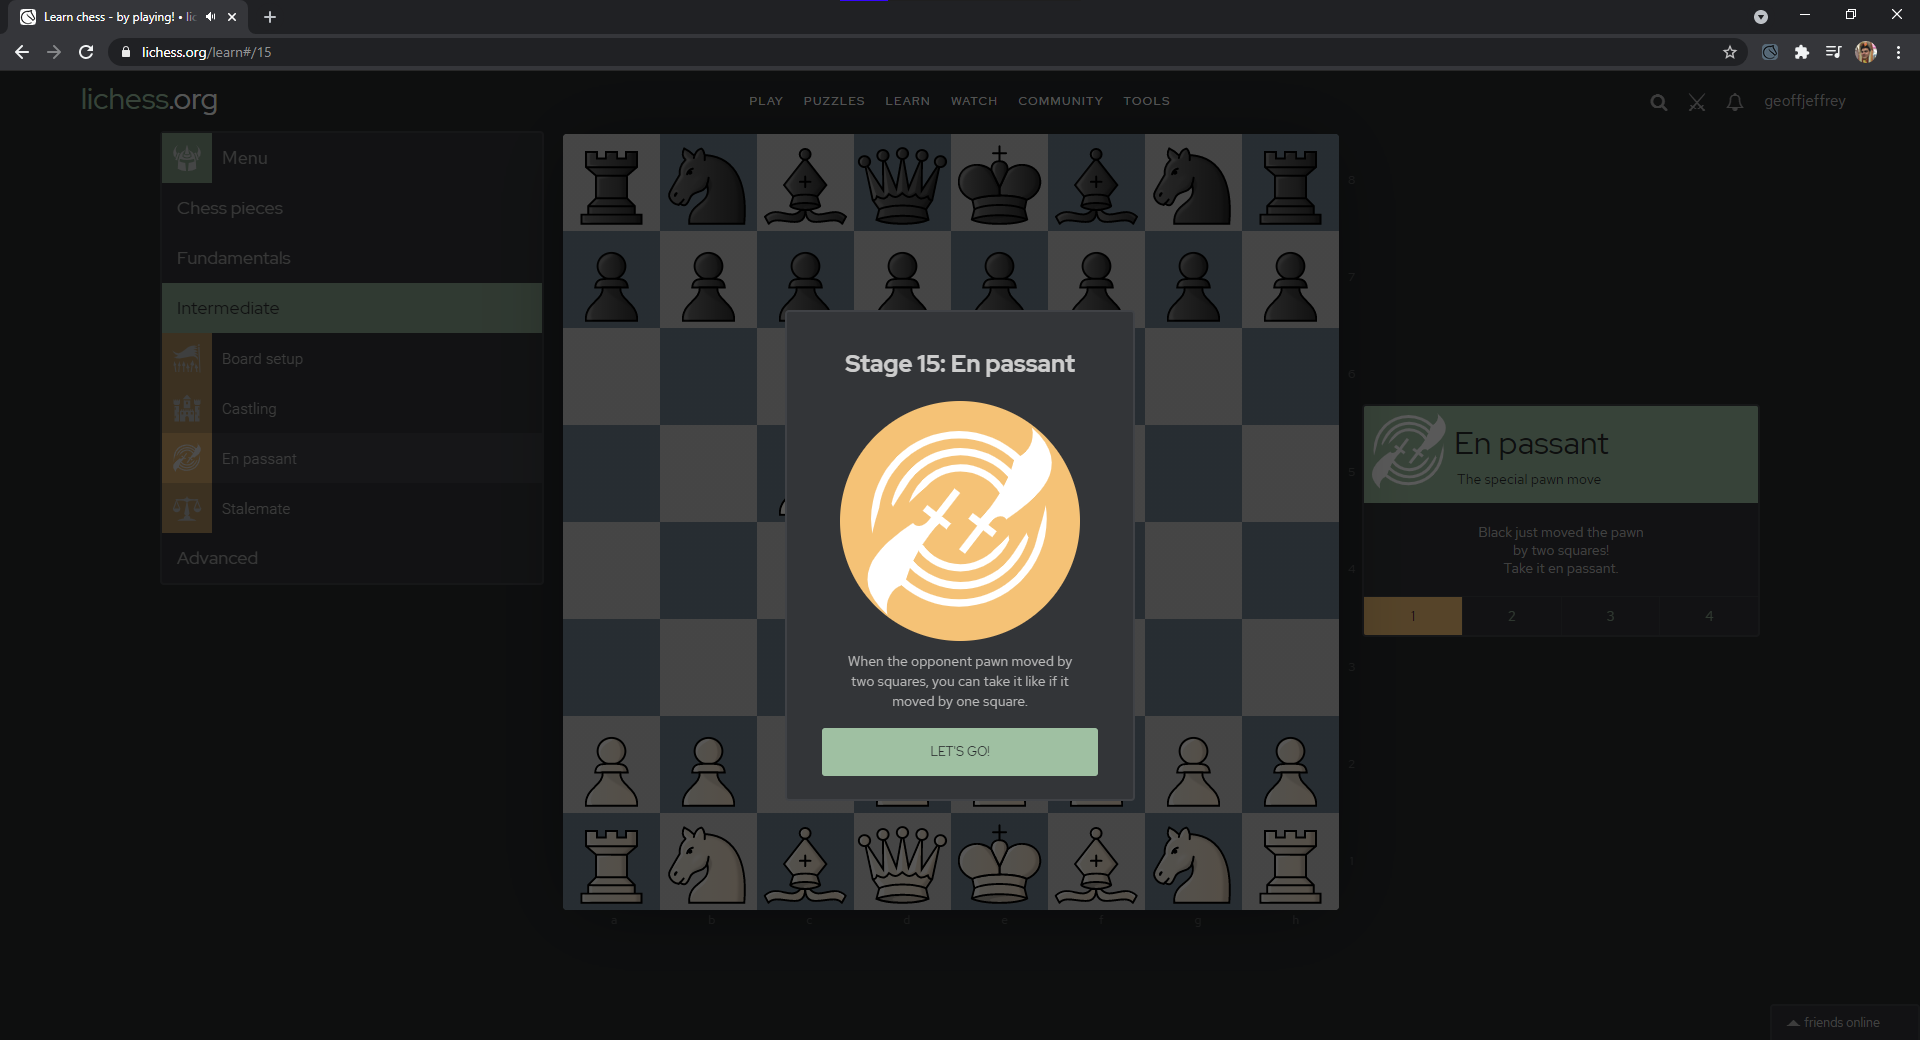 Game analysis pollutes browser history · Issue #11349 · lichess-org/lila ·  GitHub